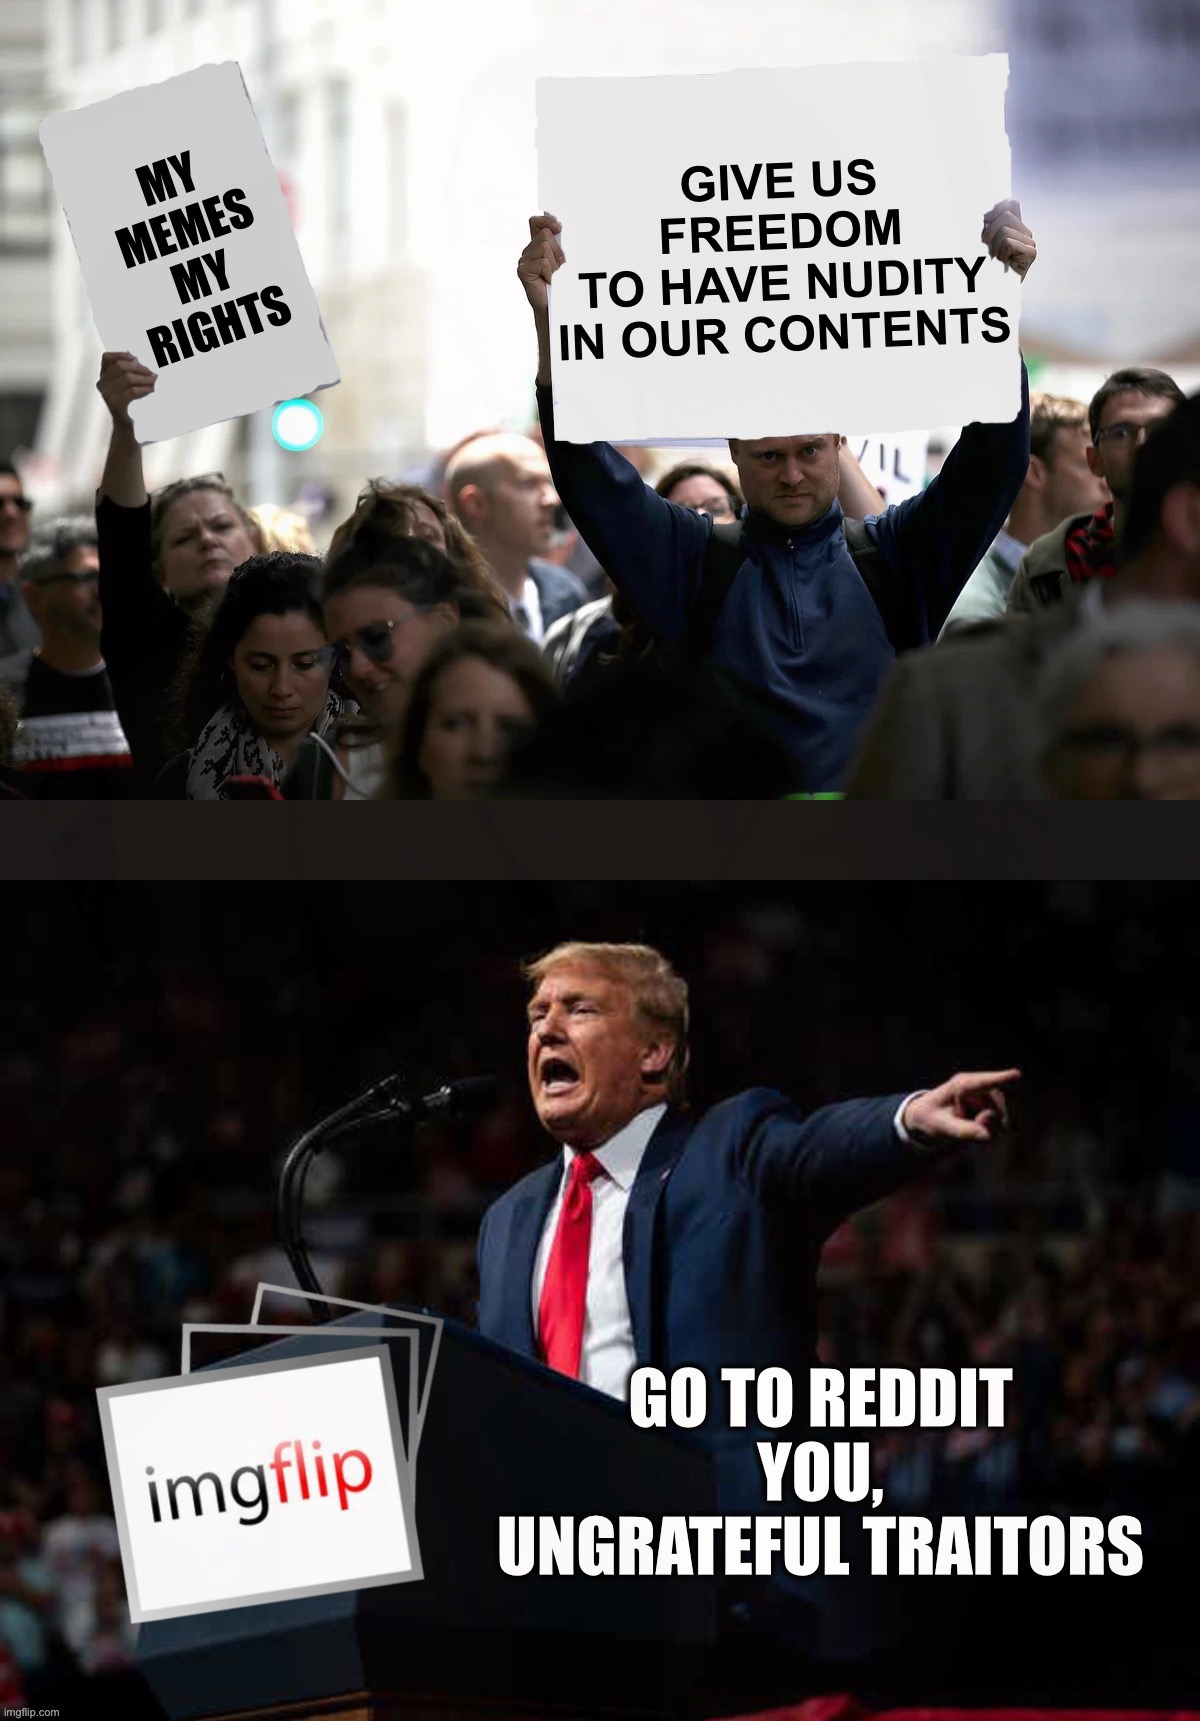 OUR MEMES, OUR RIGHTS. | image tagged in our memes our rights,freedom of creativity,nsfw,imgflip community,memes,funny | made w/ Imgflip meme maker